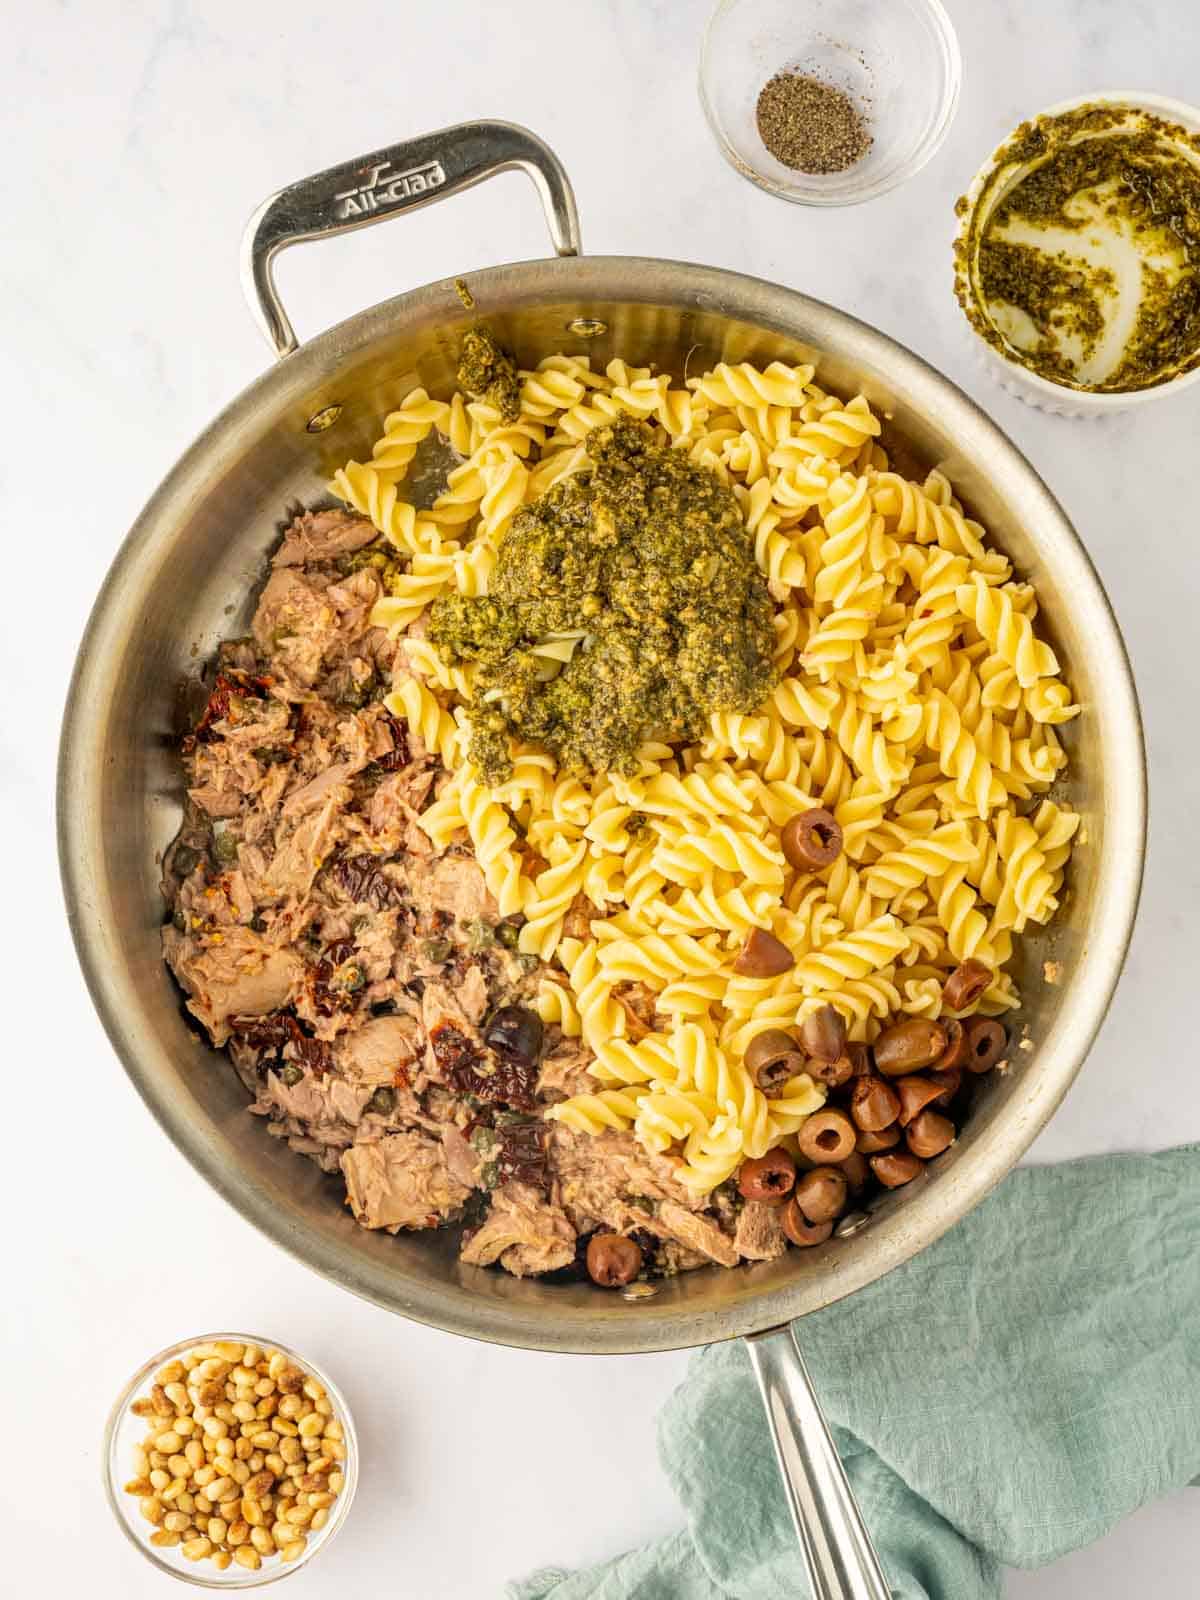 Tuna and noodles are combined with pesto sauce.